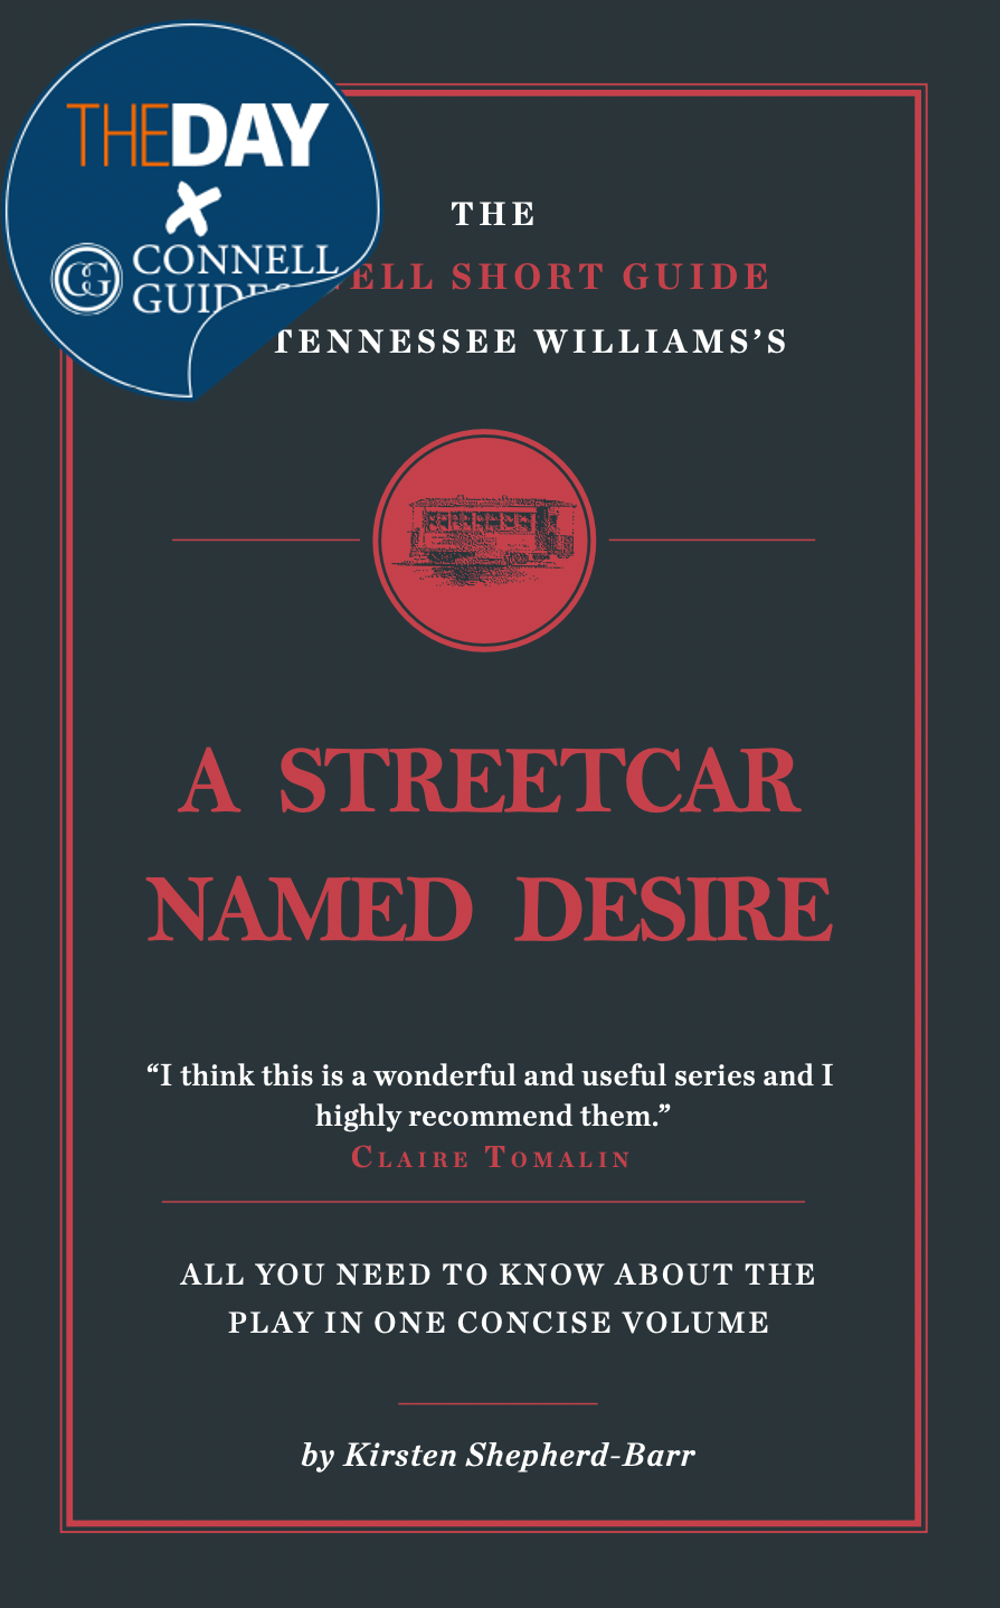 The Day x Connell Guides - The Connell Short Guide to Tennessee Williams' A Streetcar Named Desire